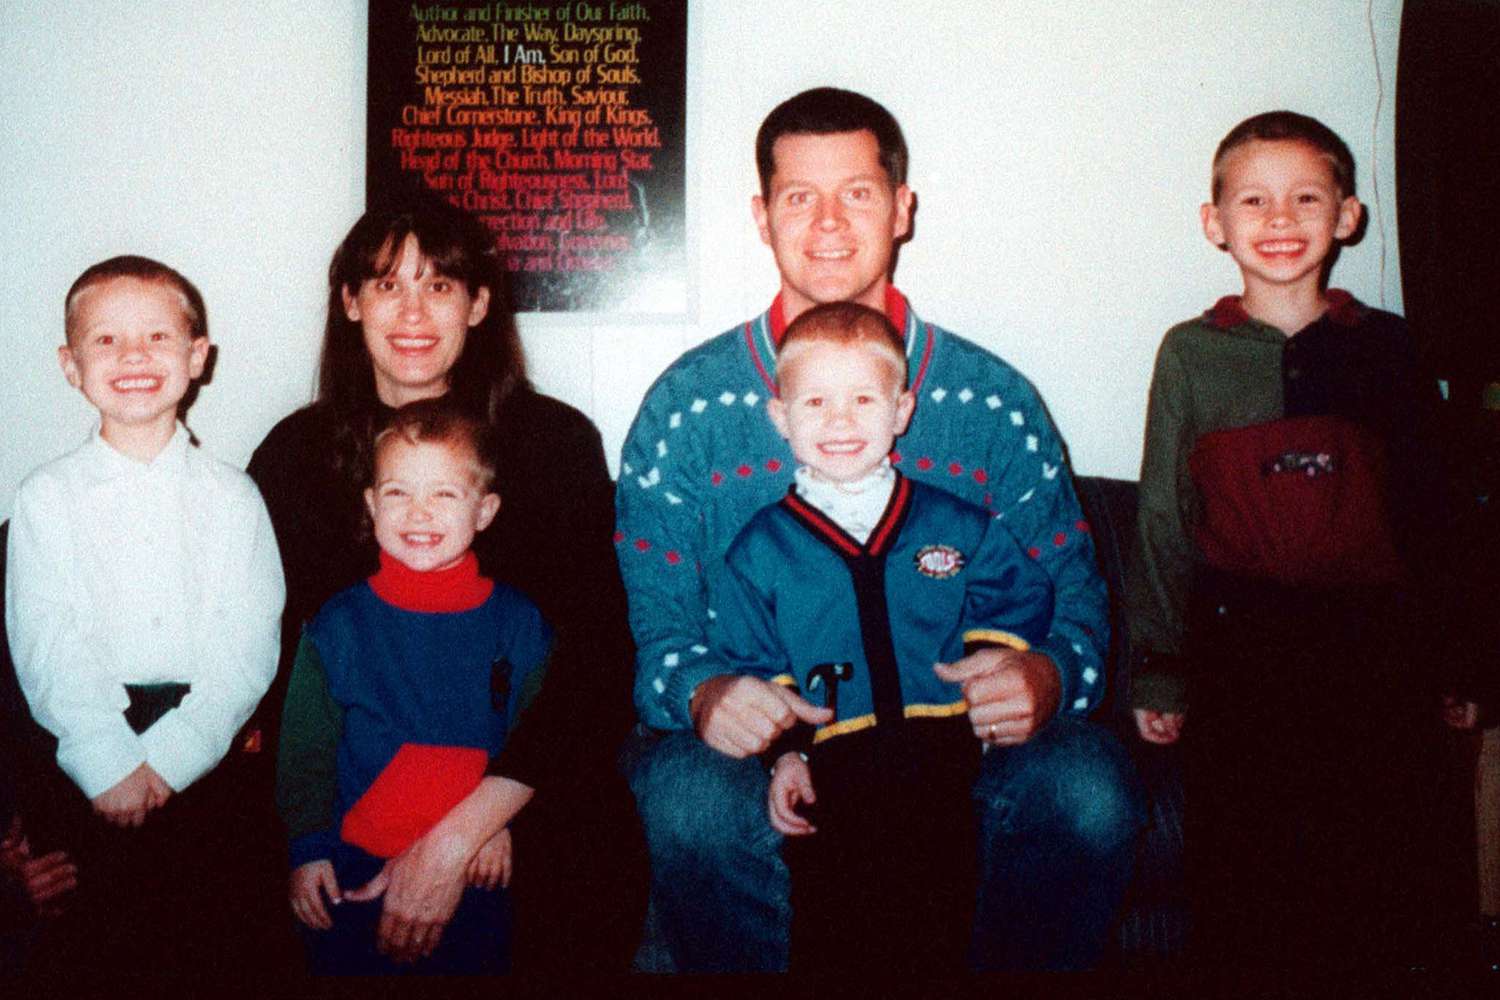 Why Did Andrea Yates Drown Her Five Children? Inside the Shocking Case 23 Years Later